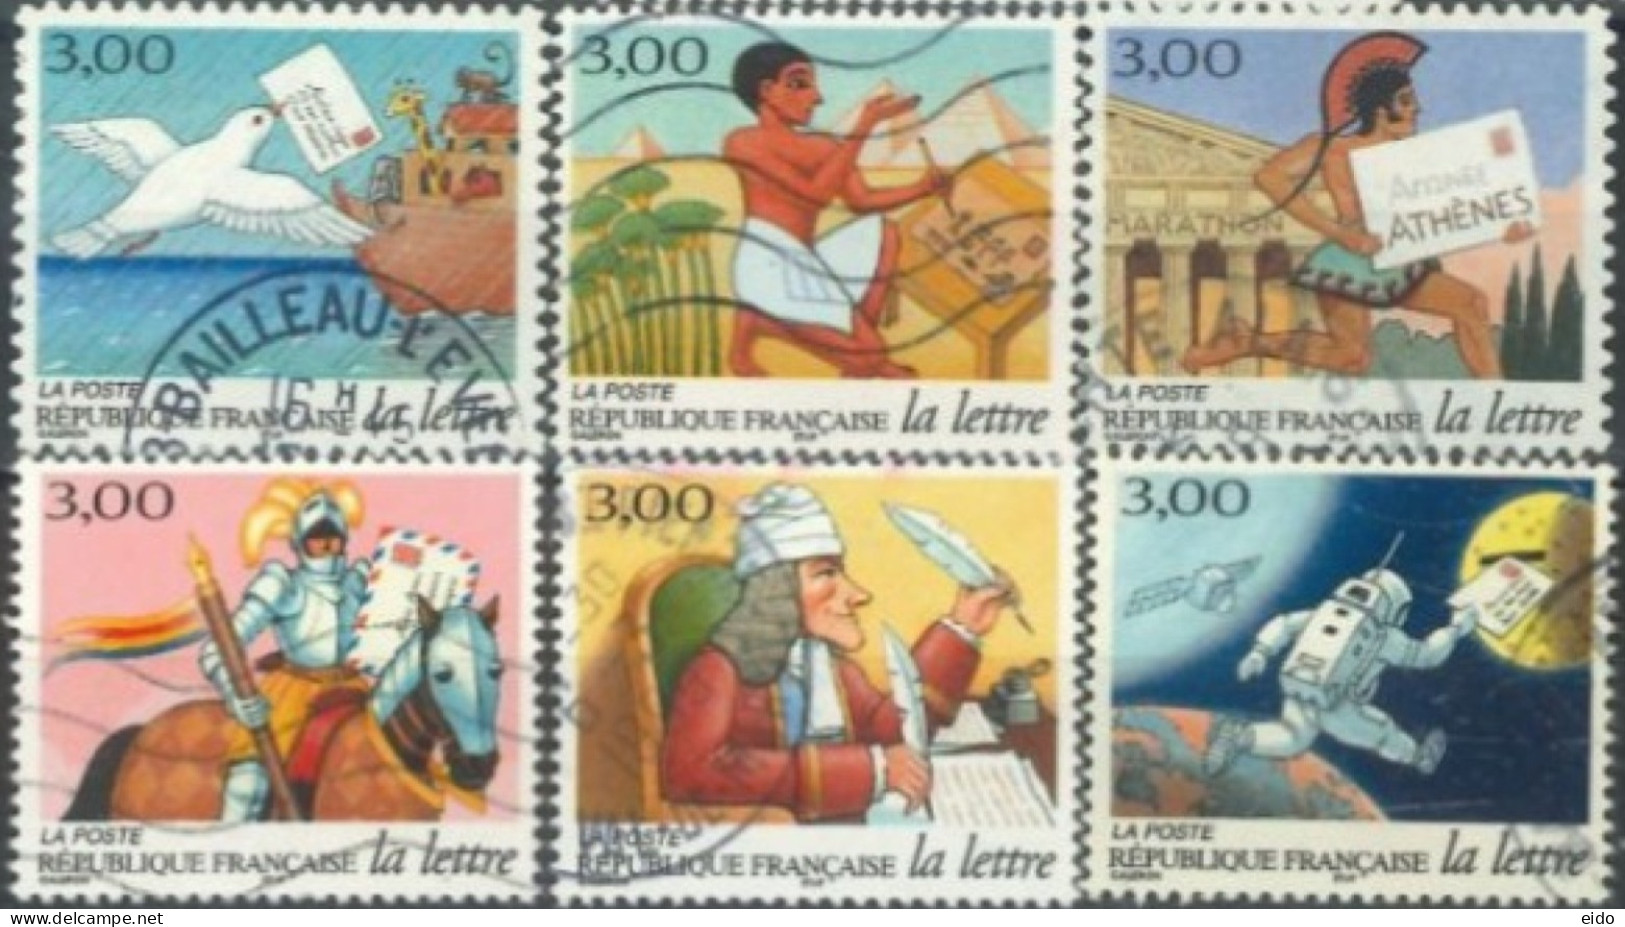 FRANCE -1998 - POST DAY AHESSIVE STAMPS COMPLETE SET OF 6,  # 3150/55, USED - Gebraucht